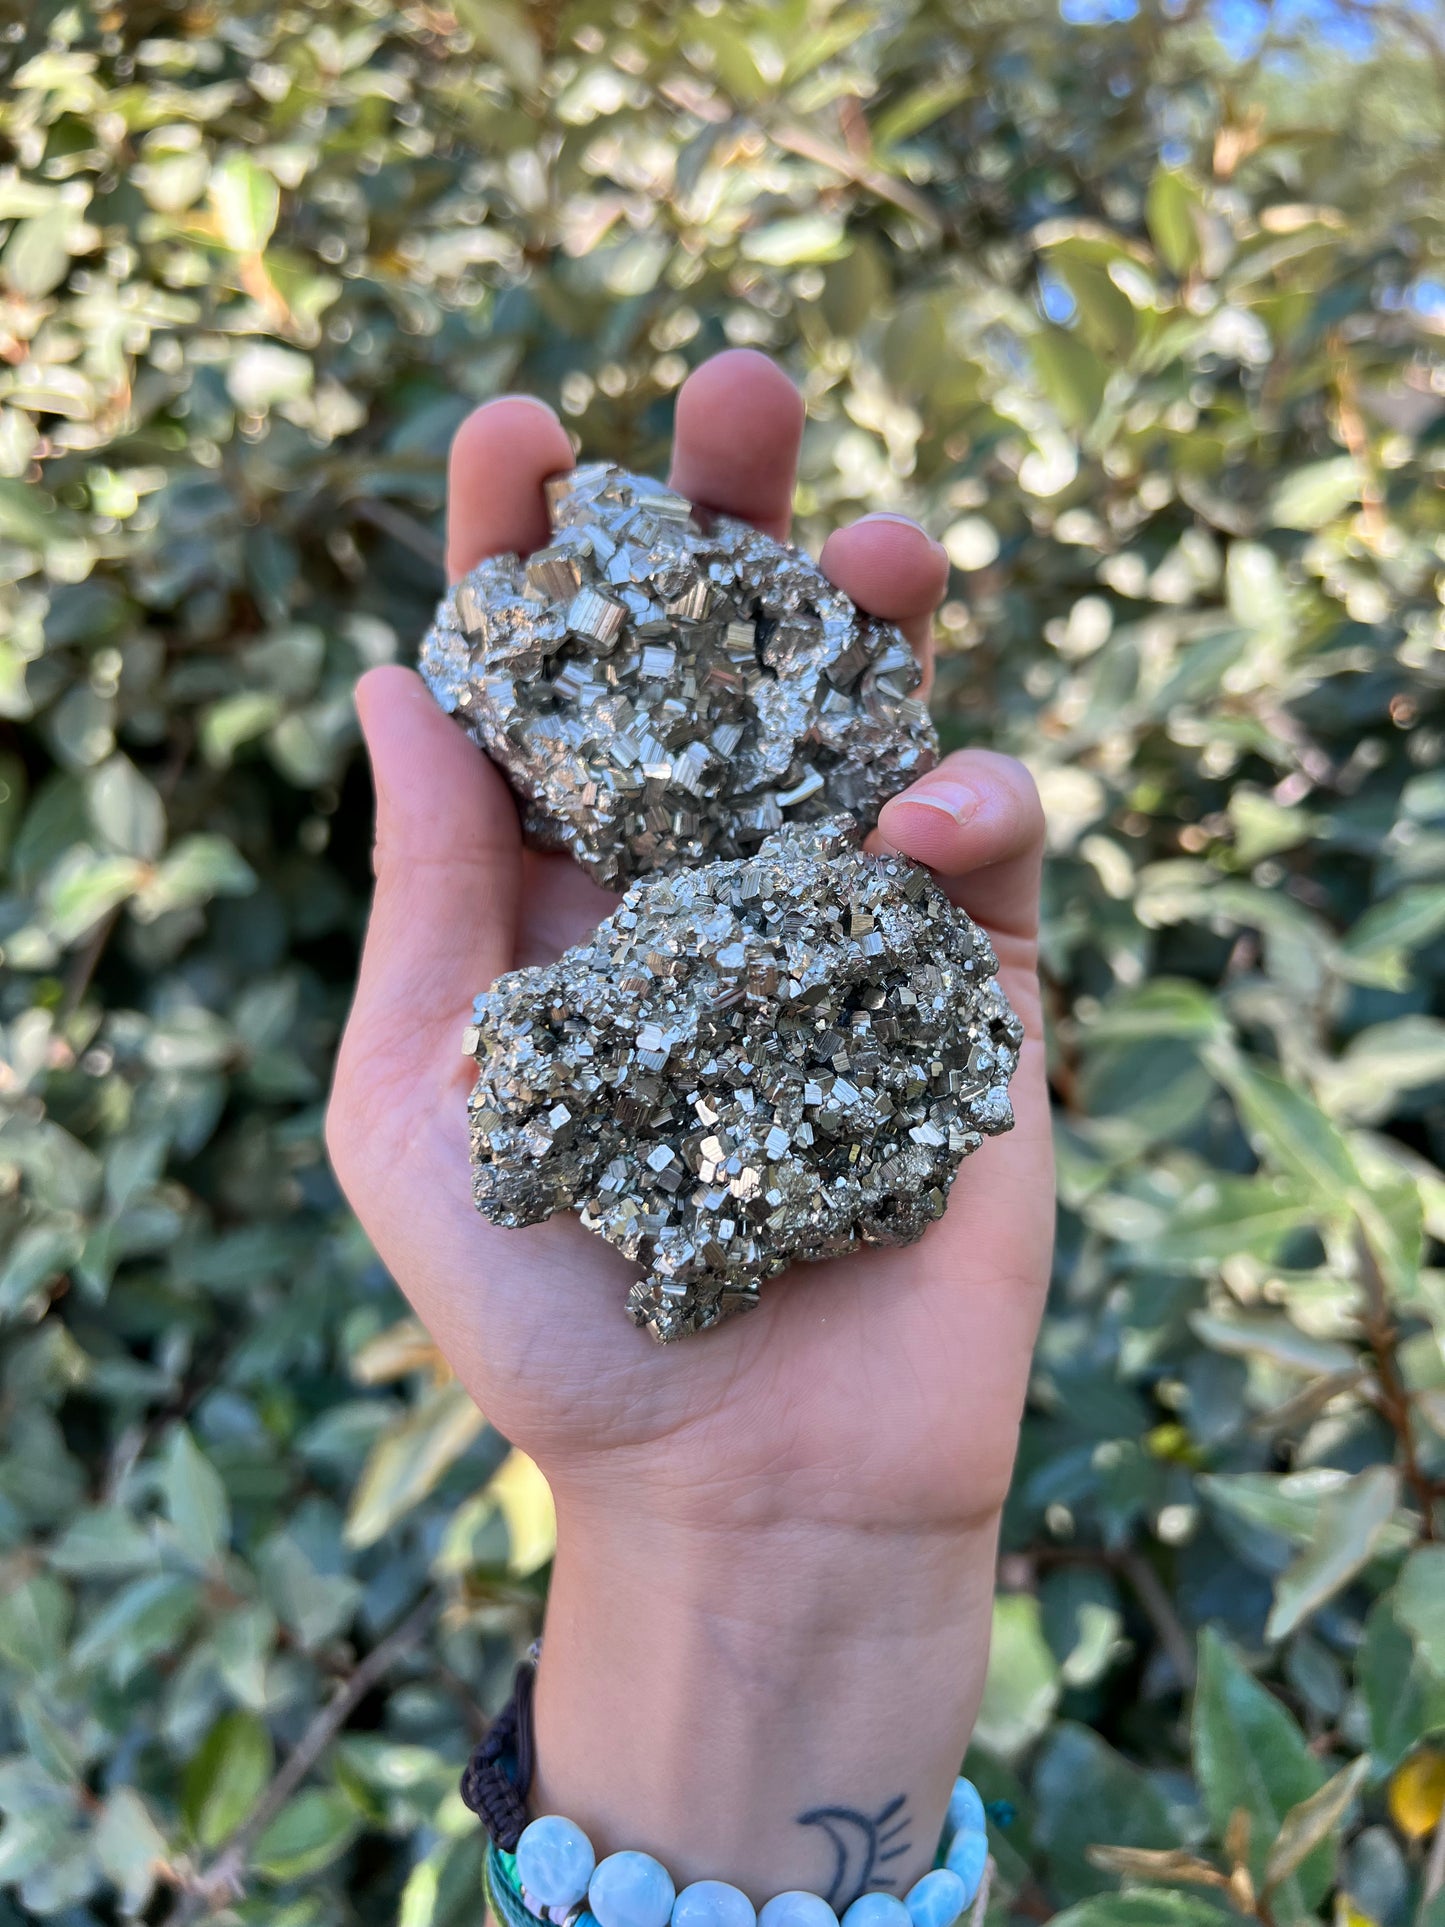 PYRITE CLUSTER